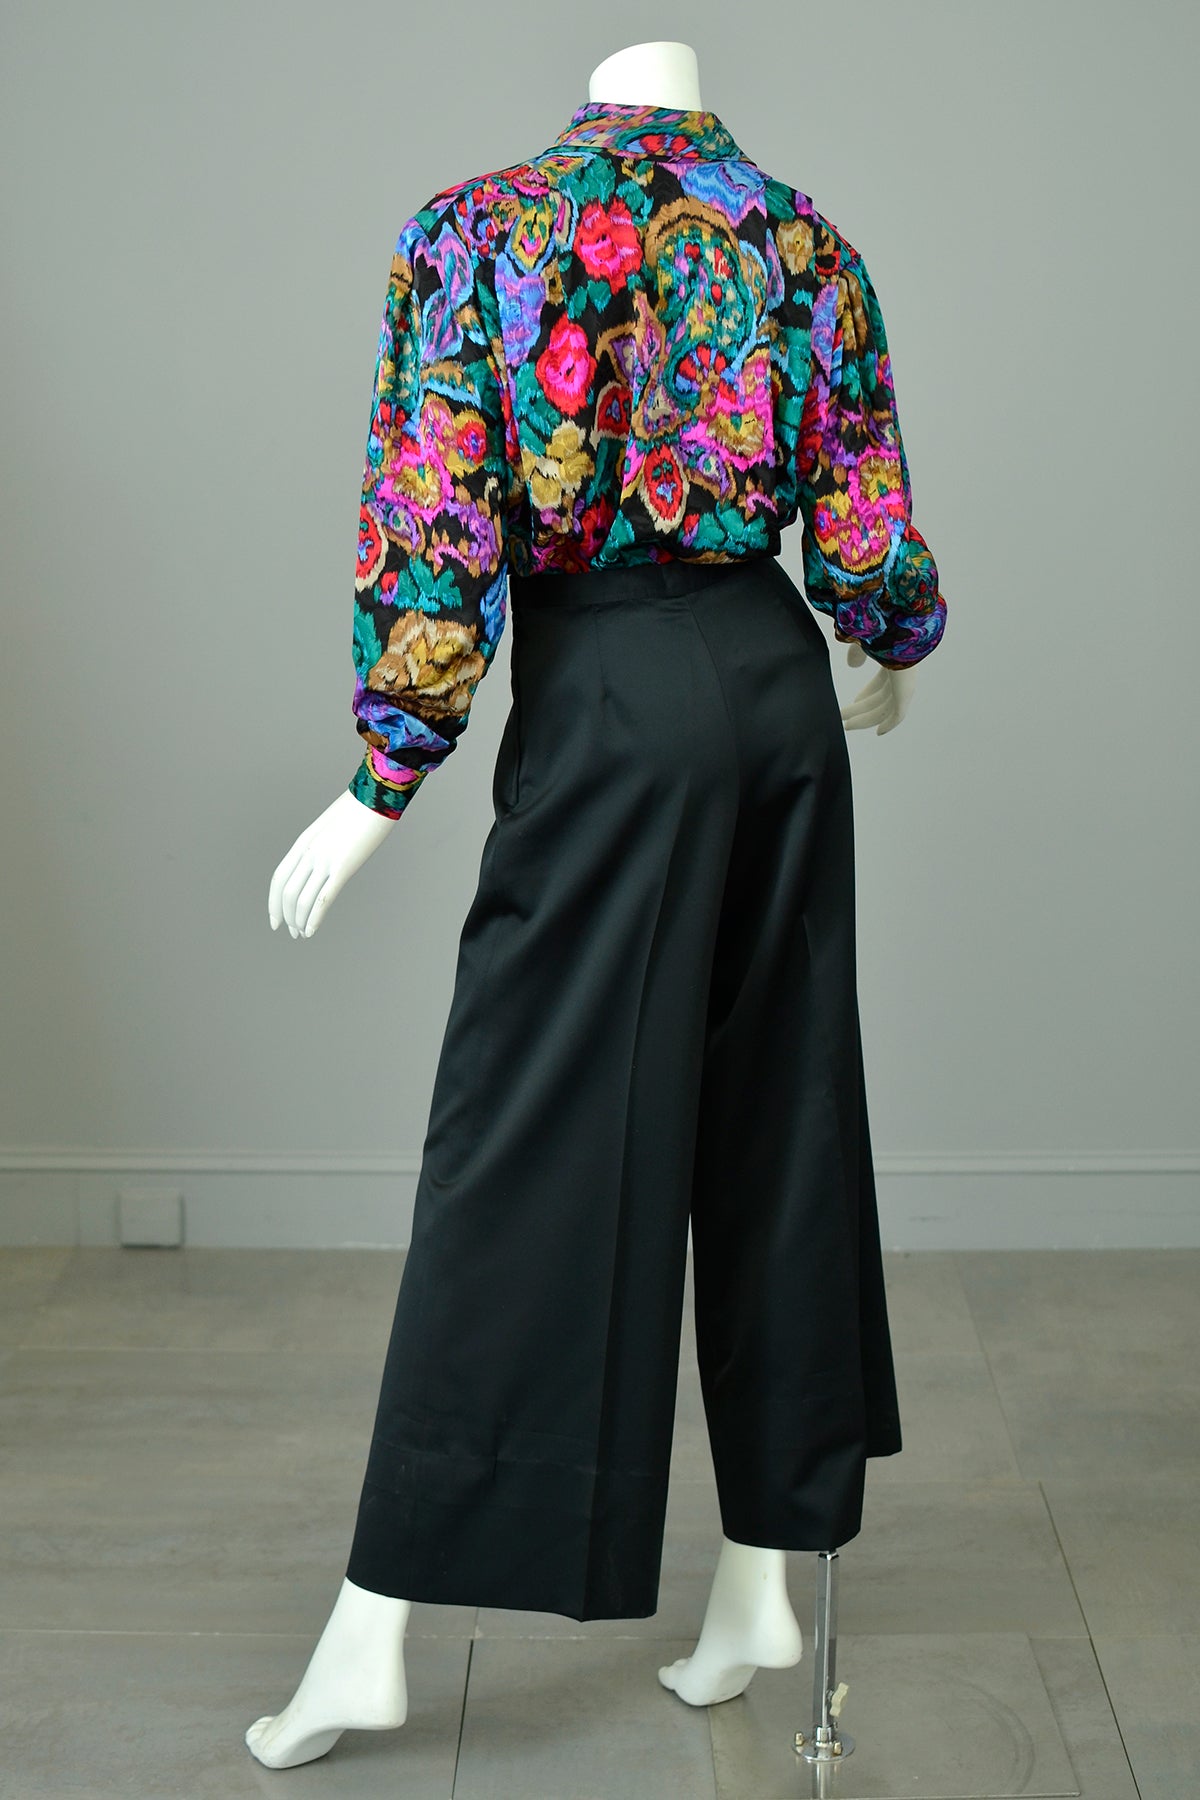 1980s Vibrant Neon Floral Rose Print Silk Blouse with Pleated Shoulders